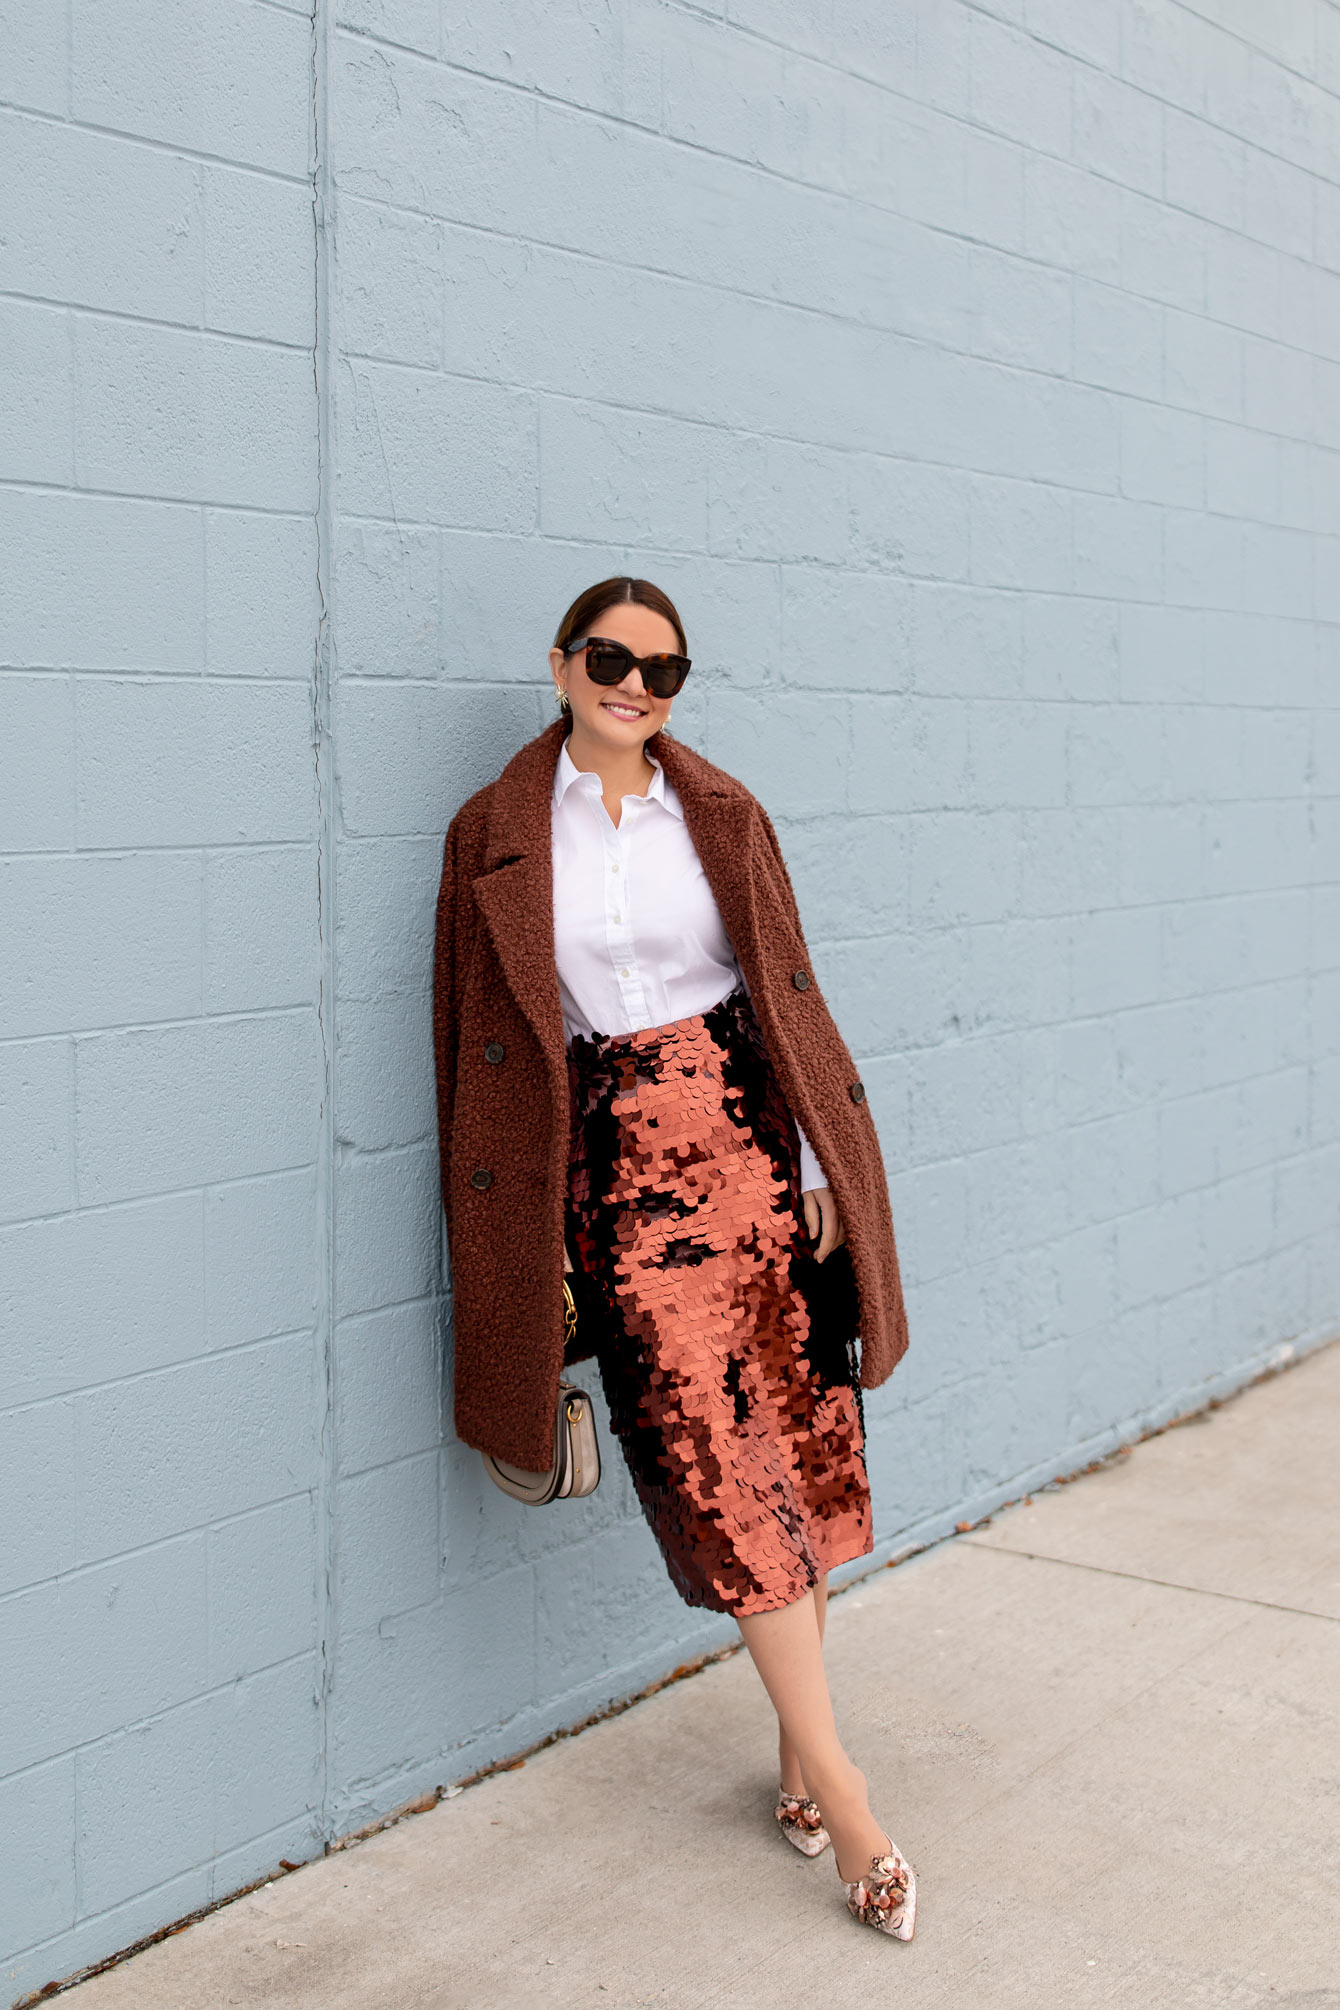 Styling a Copper Sequin Paillette Skirt and Teddy Coat - Style Charade